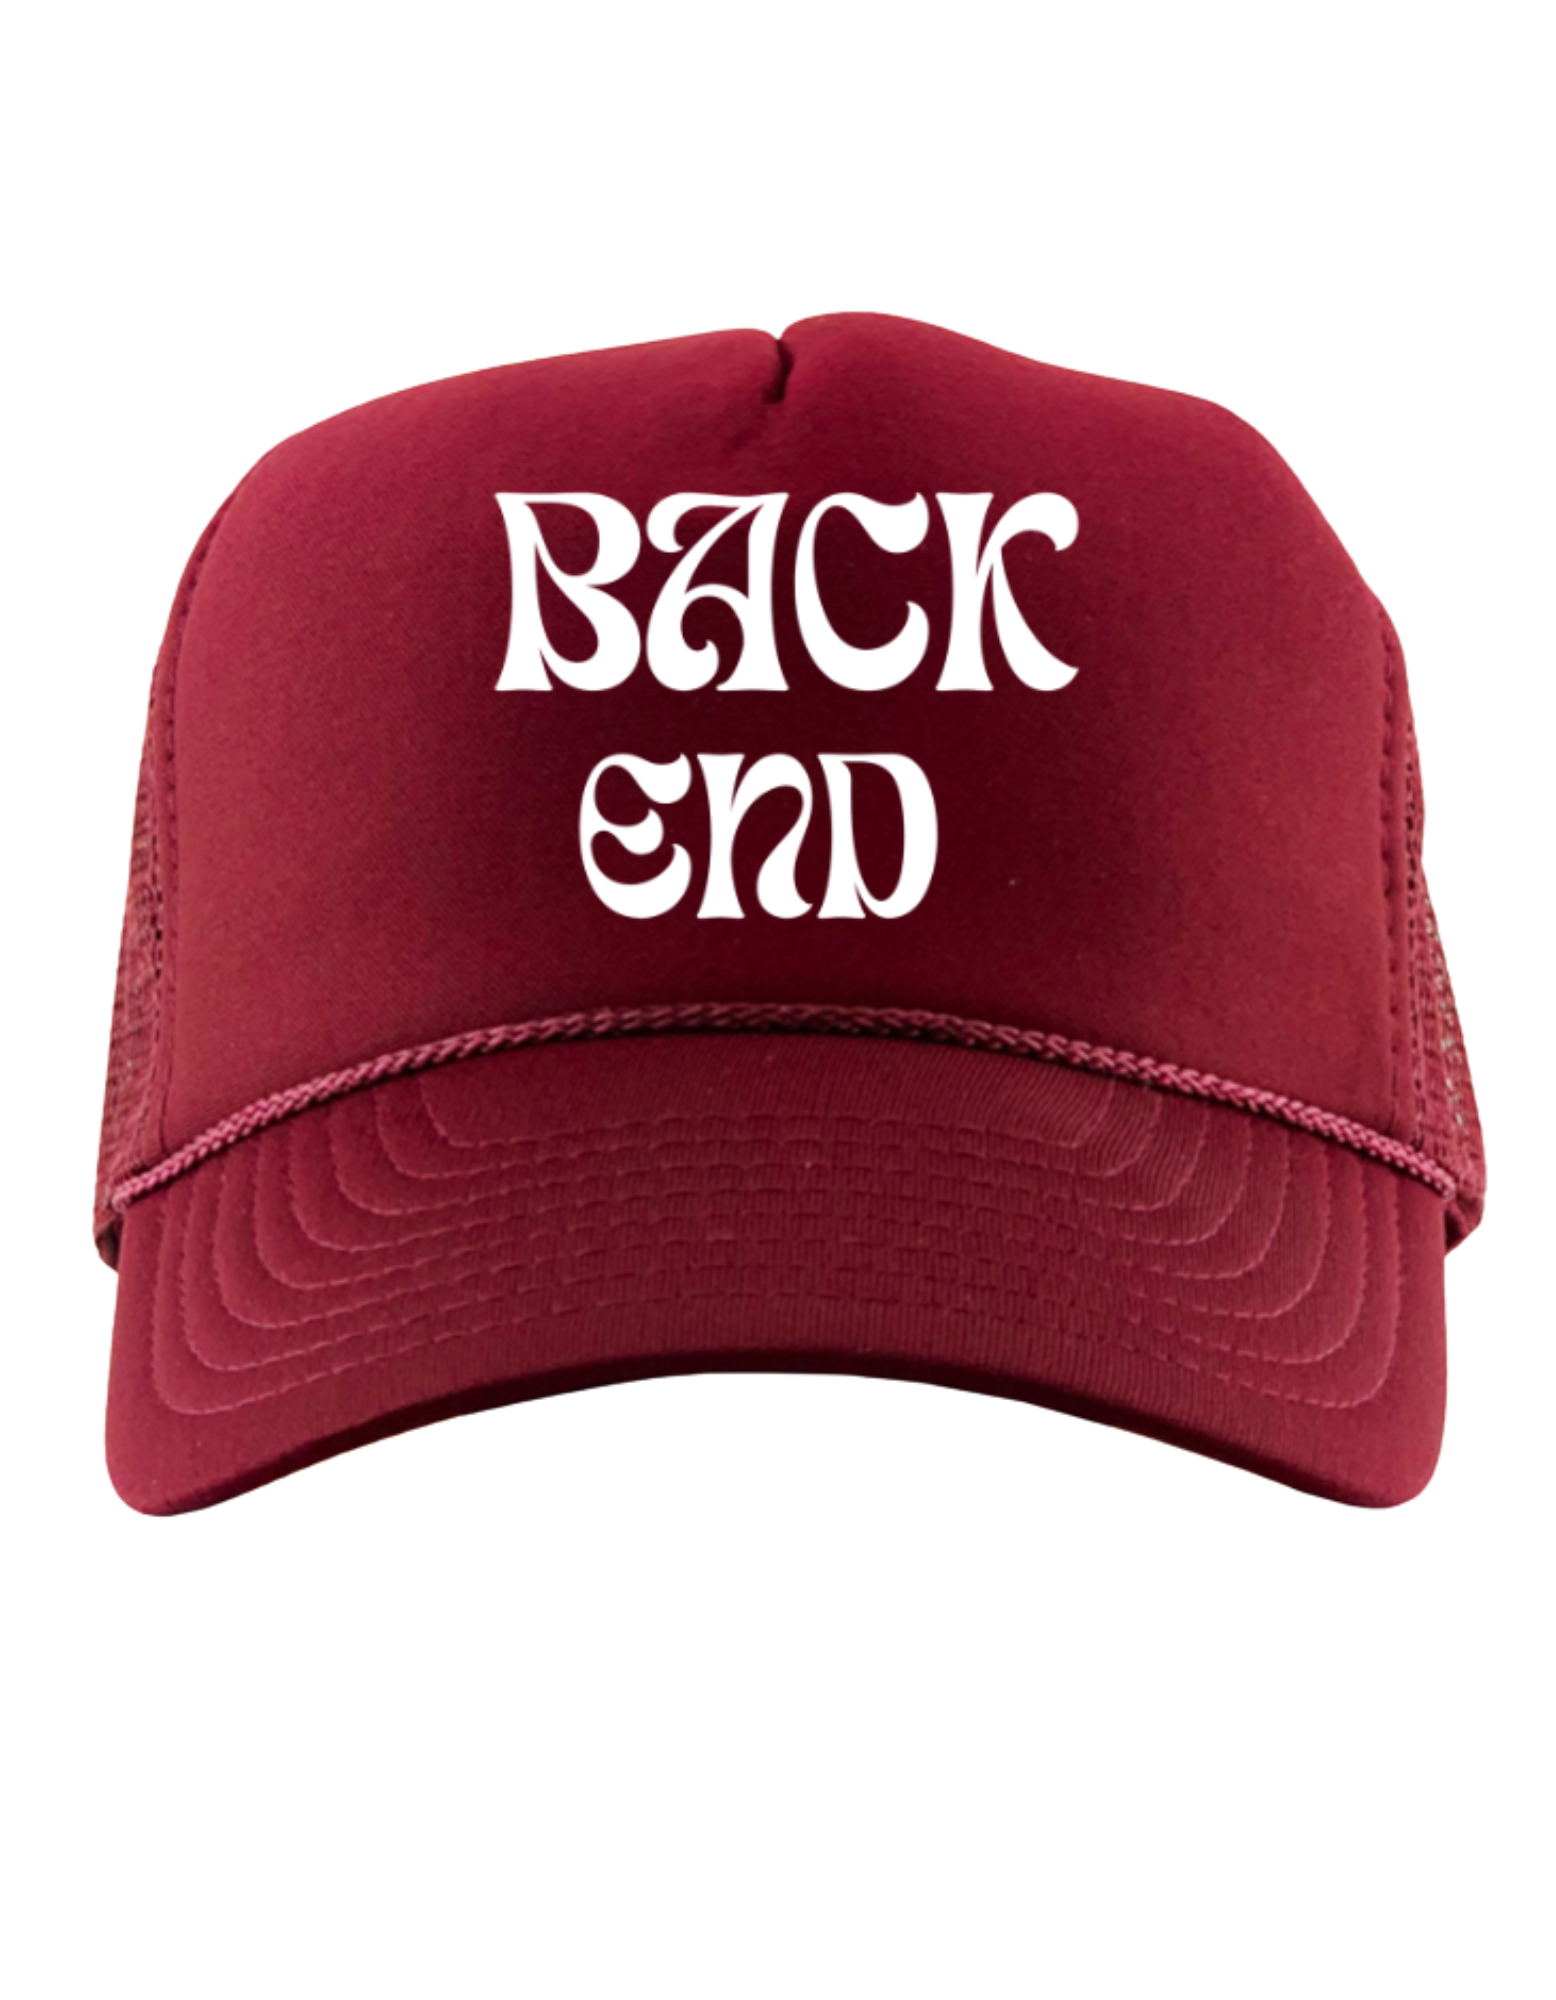 *PRE-ORDER* LIMITED EDITION BACK END - FEBE TRUCKER HAT (MAROON)